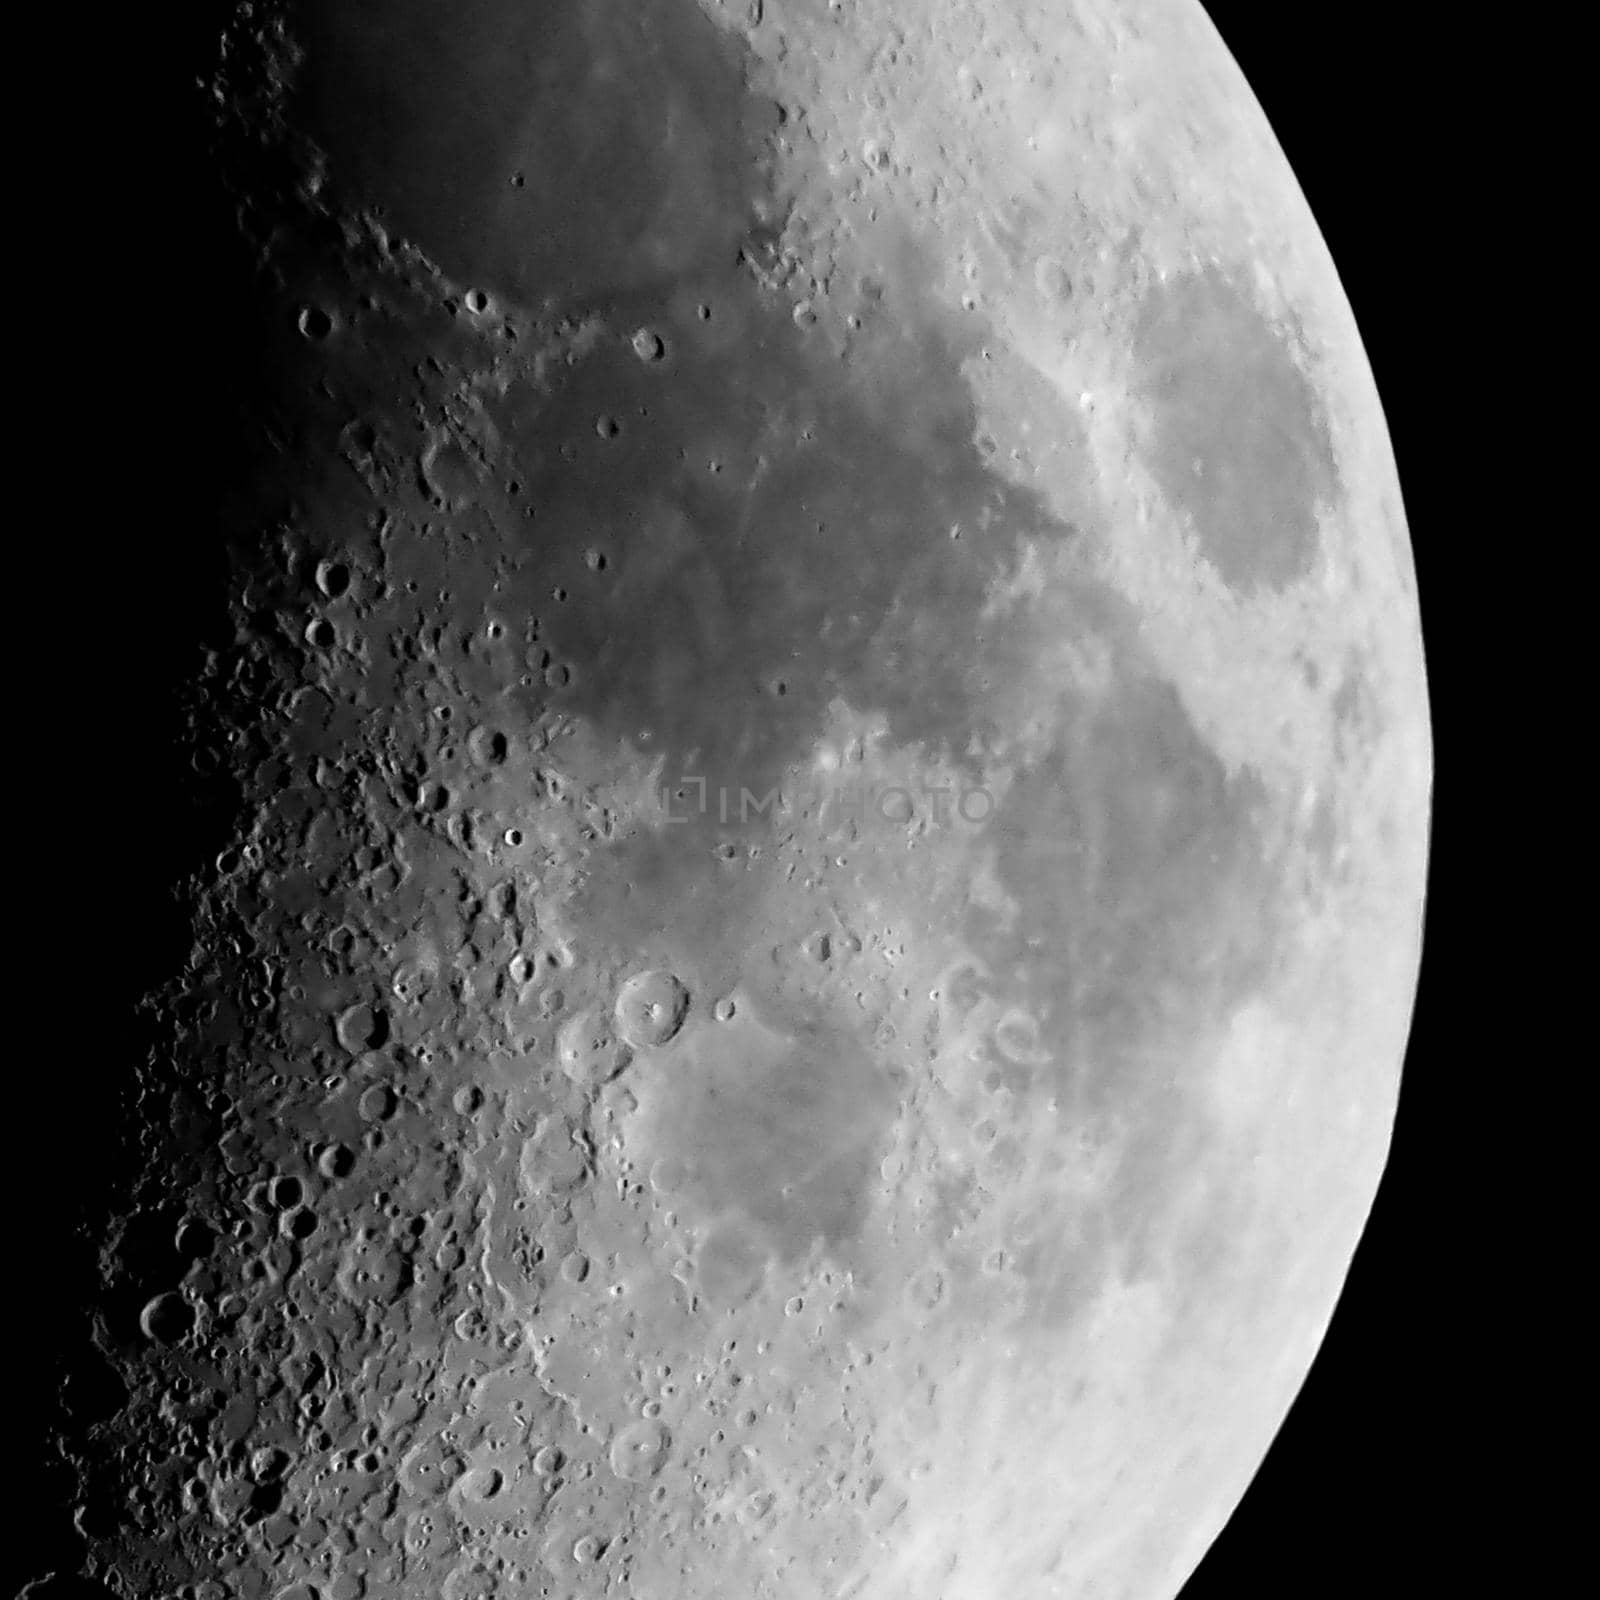 First quarter moon seen with telescope in black and white by claudiodivizia